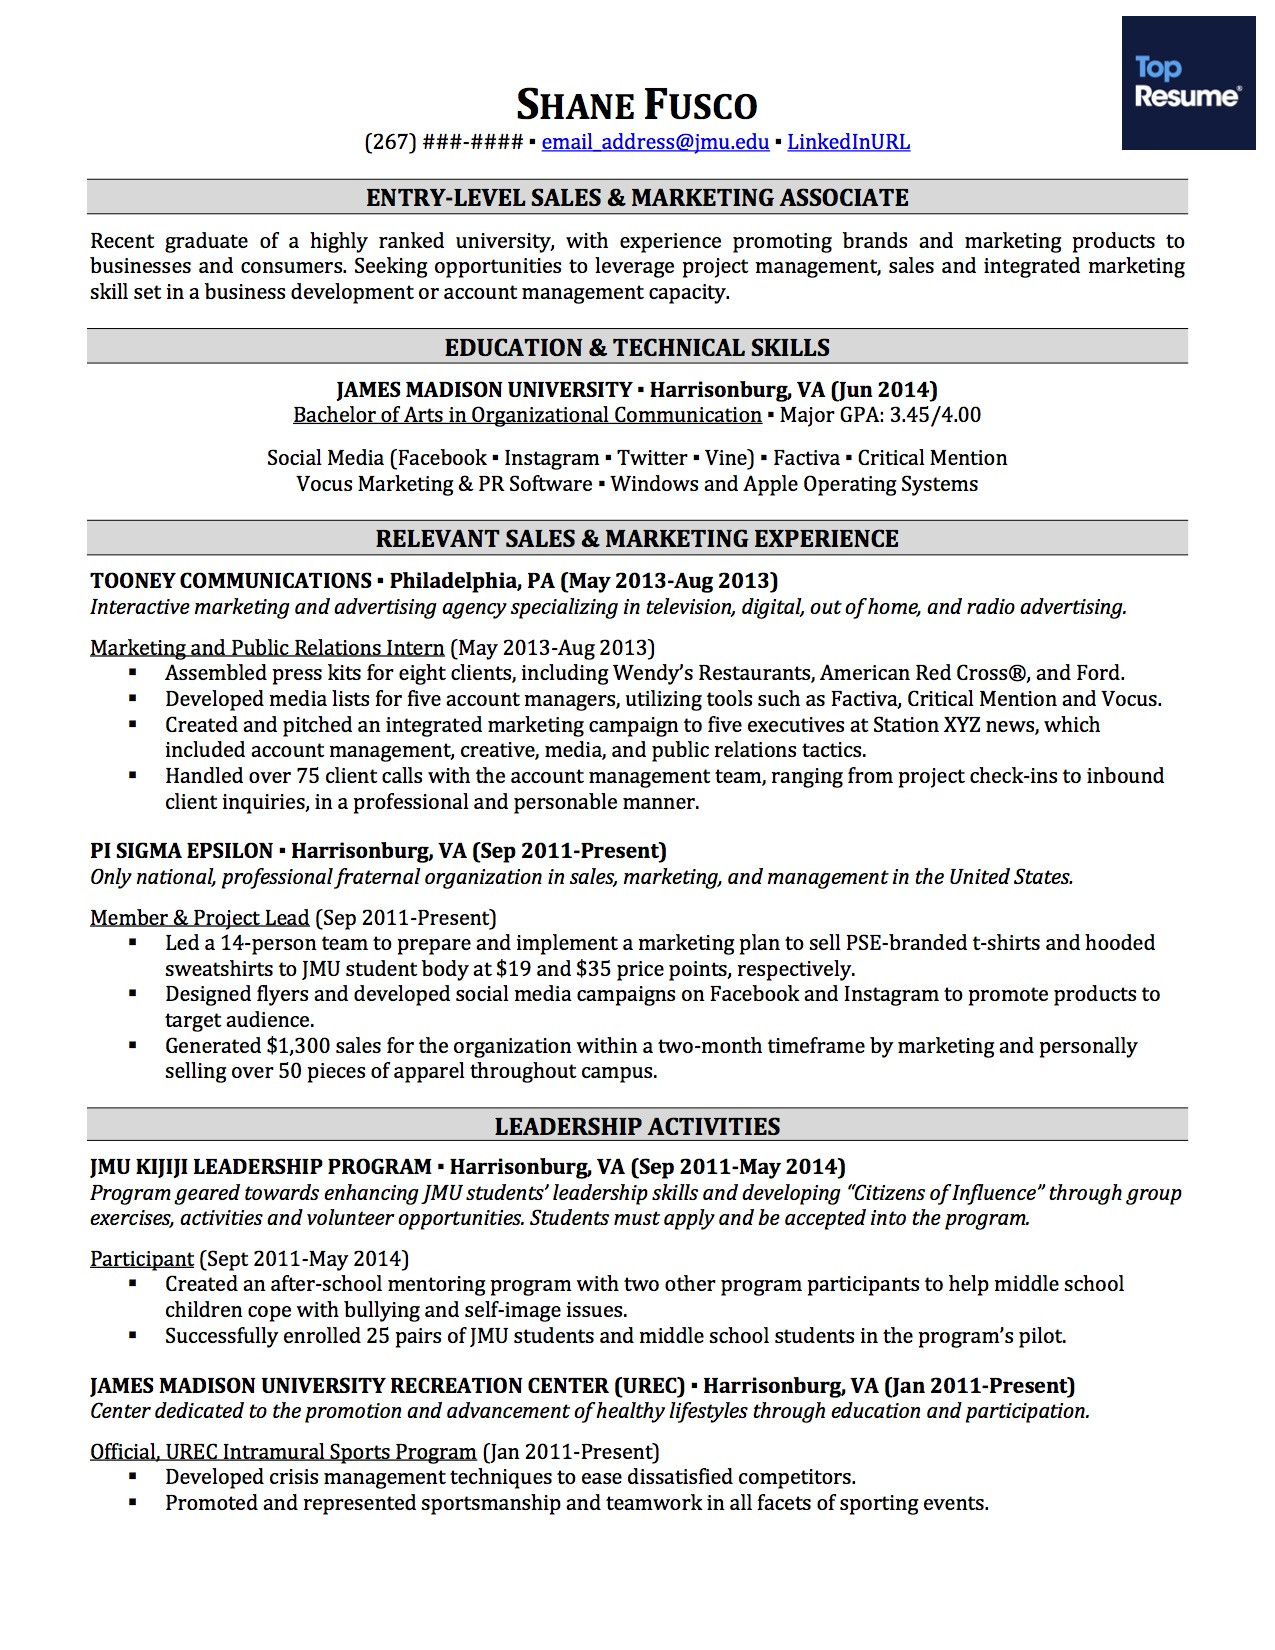 Resume Templates for Students with No Job Experience How to Make A Resume with No Experience topresume